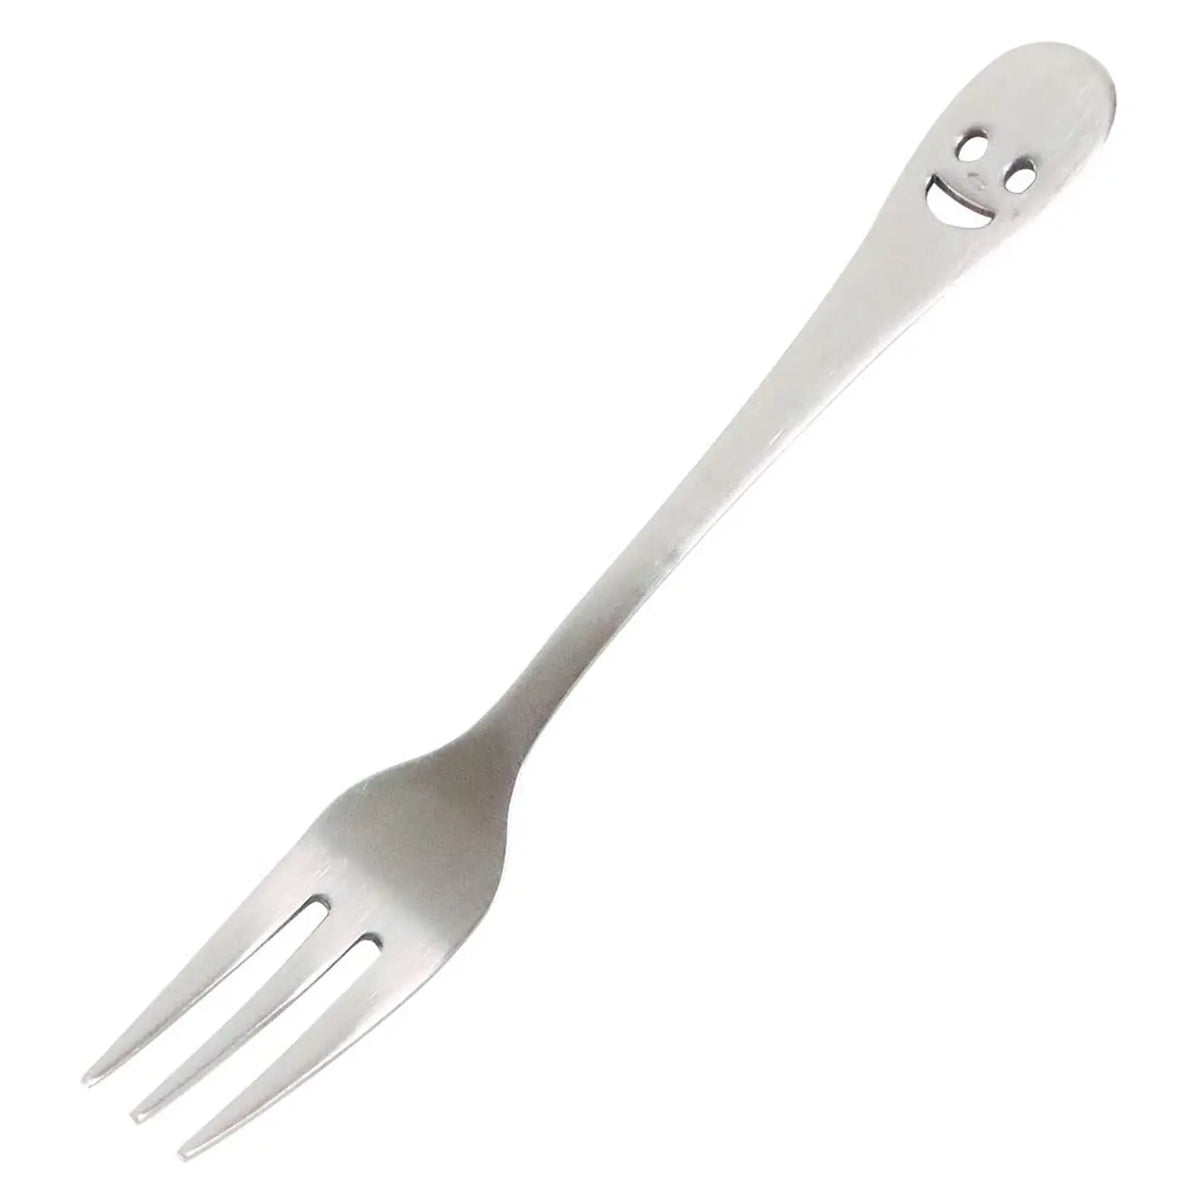 Wada Nico Stainless Steel Pastry Fork 13.1cm